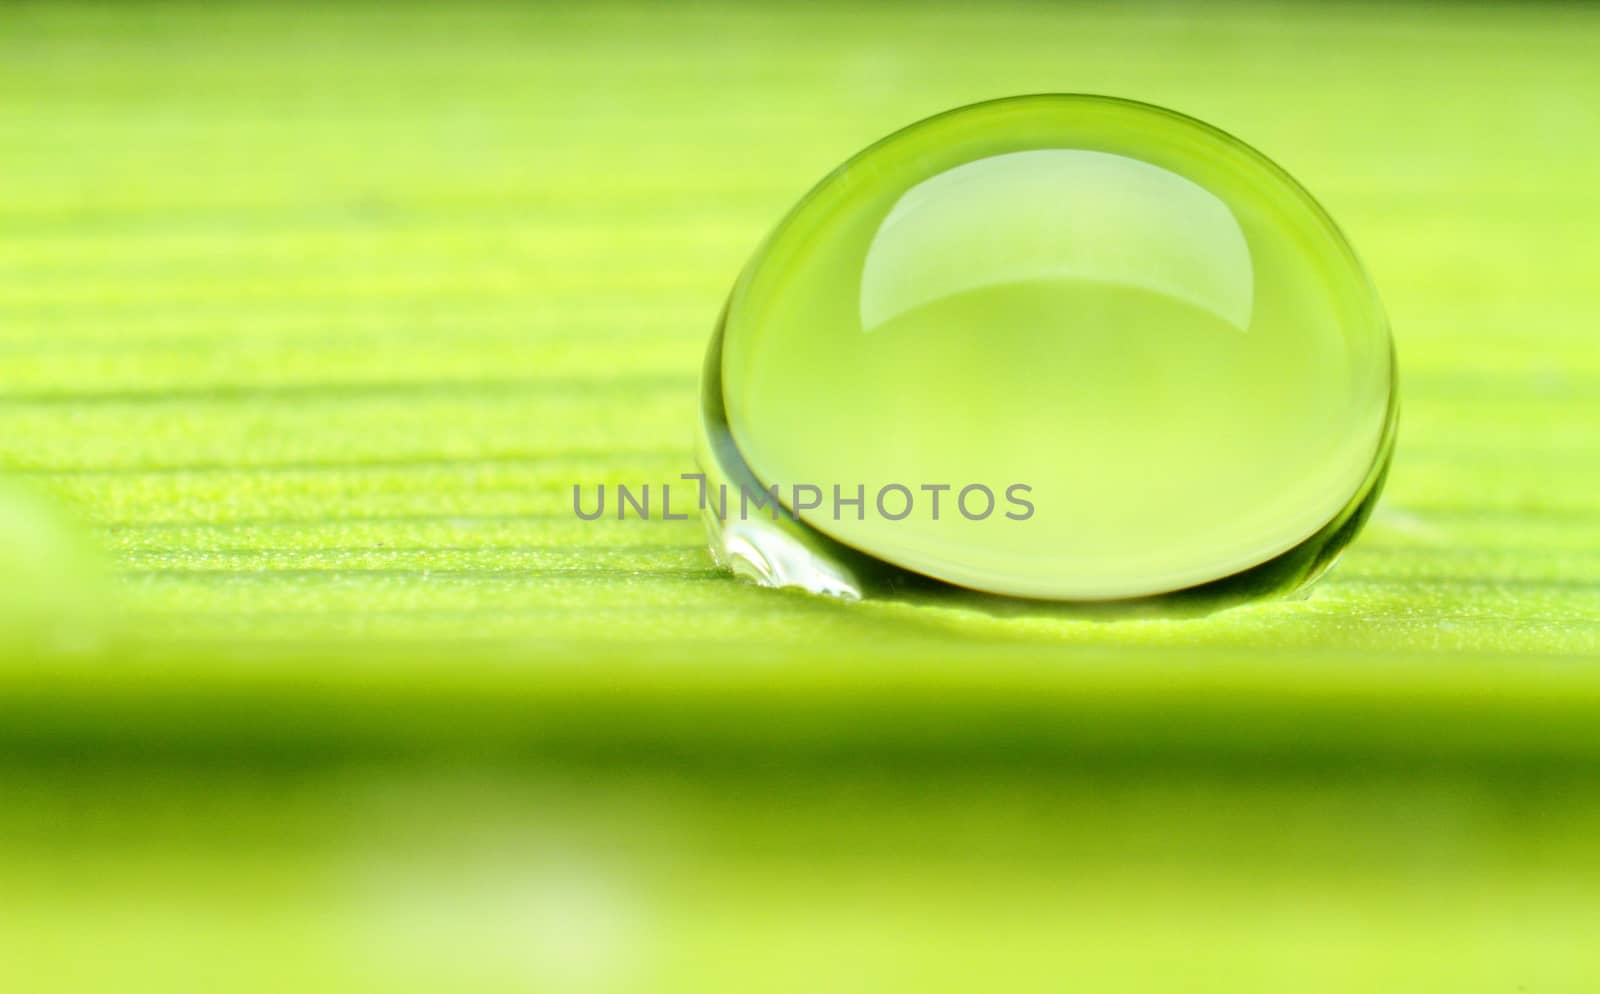 a drop of dew on a green leaf very close up. High quality photo